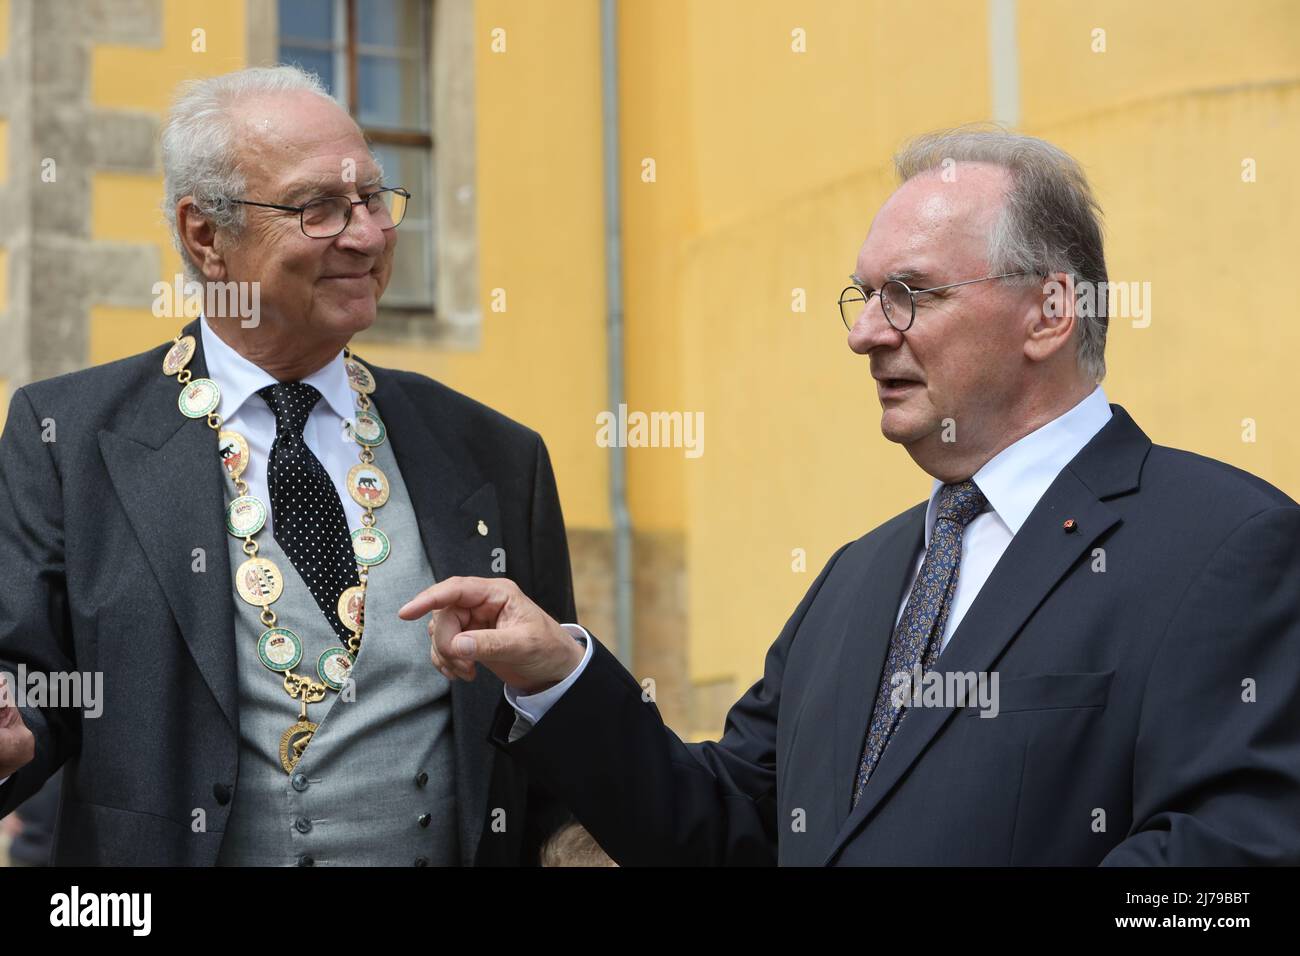 07 May 2022, Saxony-Anhalt, Ballenstedt: Eduard Prince of Anhalt stands next to Saxony-Anhalt's Prime Minister Reiner Haseloff. Eduard von Anhalt celebrates his 80th birthday in Ballenstedt. At the same time the investiture took place. In the context of the Investitur annually persons for special achievements of the Askanischen house order 'Albrecht the bear' are honored. The investiture takes place in the presence of Eduard Prince of Anhalt. Photo: Matthias Bein/dpa-Zentralbild/ZB Stock Photo